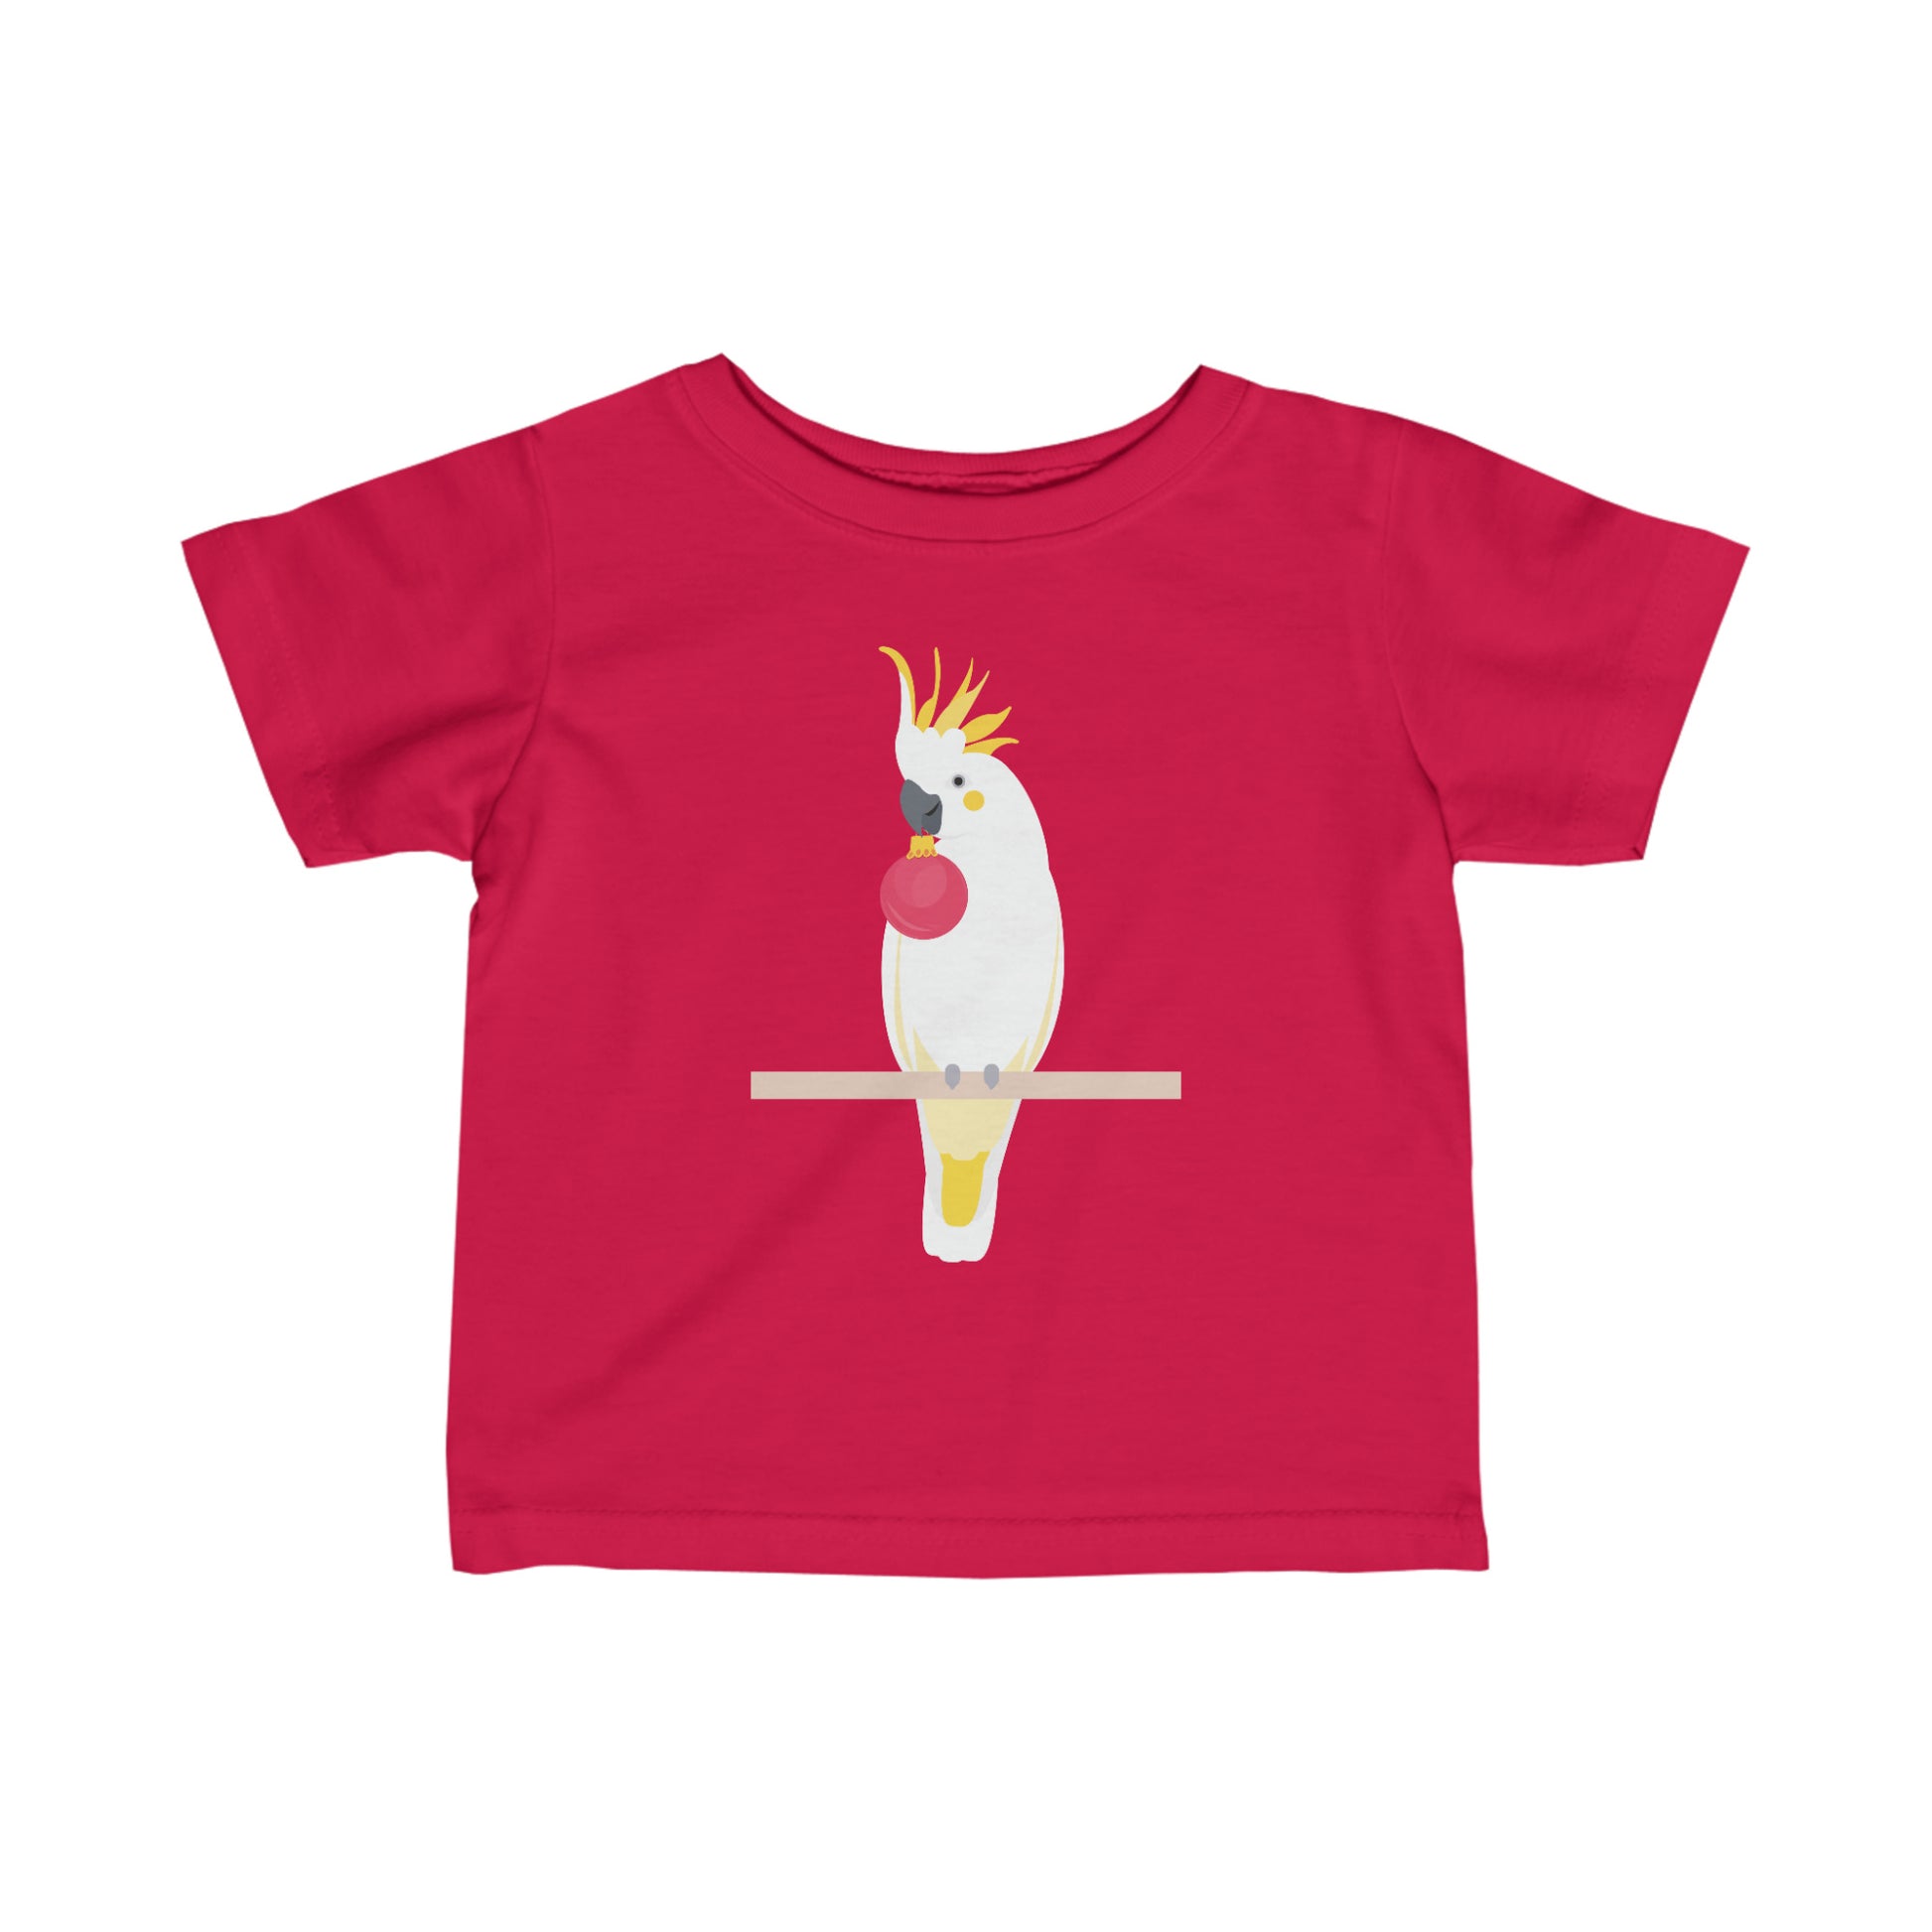 red kids t-shirt with a cockatoo perched holding a Christmas bauble